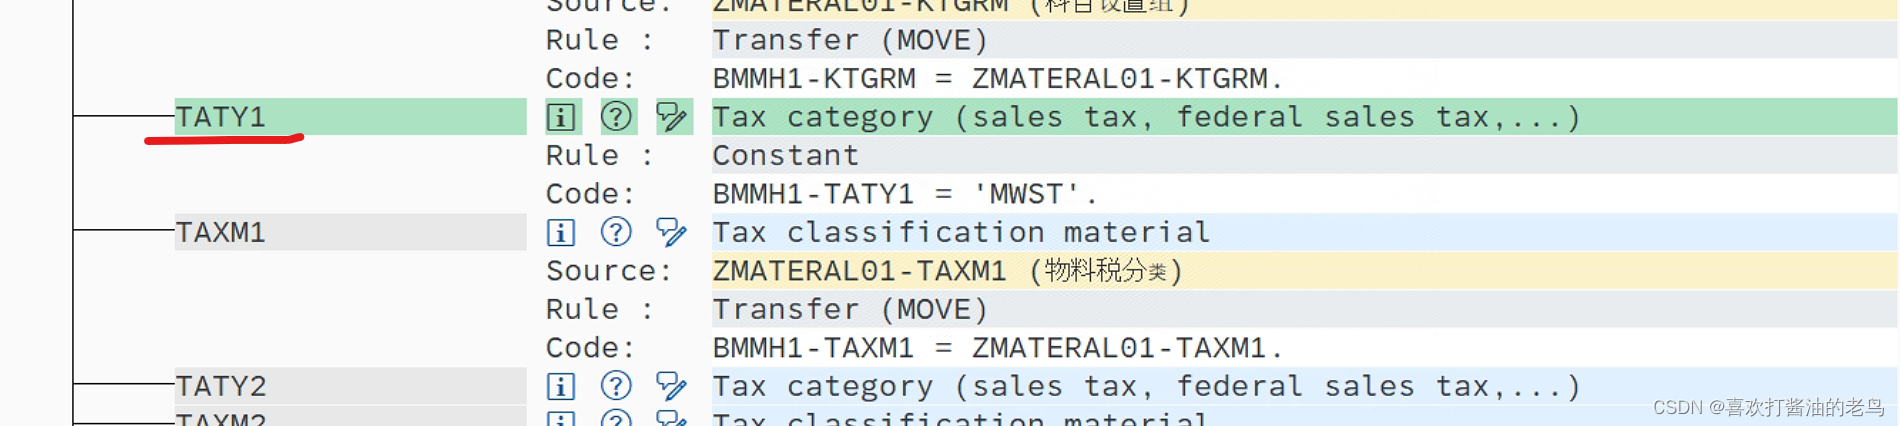 SAP LSWM 导入物料主数据报错- Tax category / is not defined for country CN - 之对策_销售试图_05